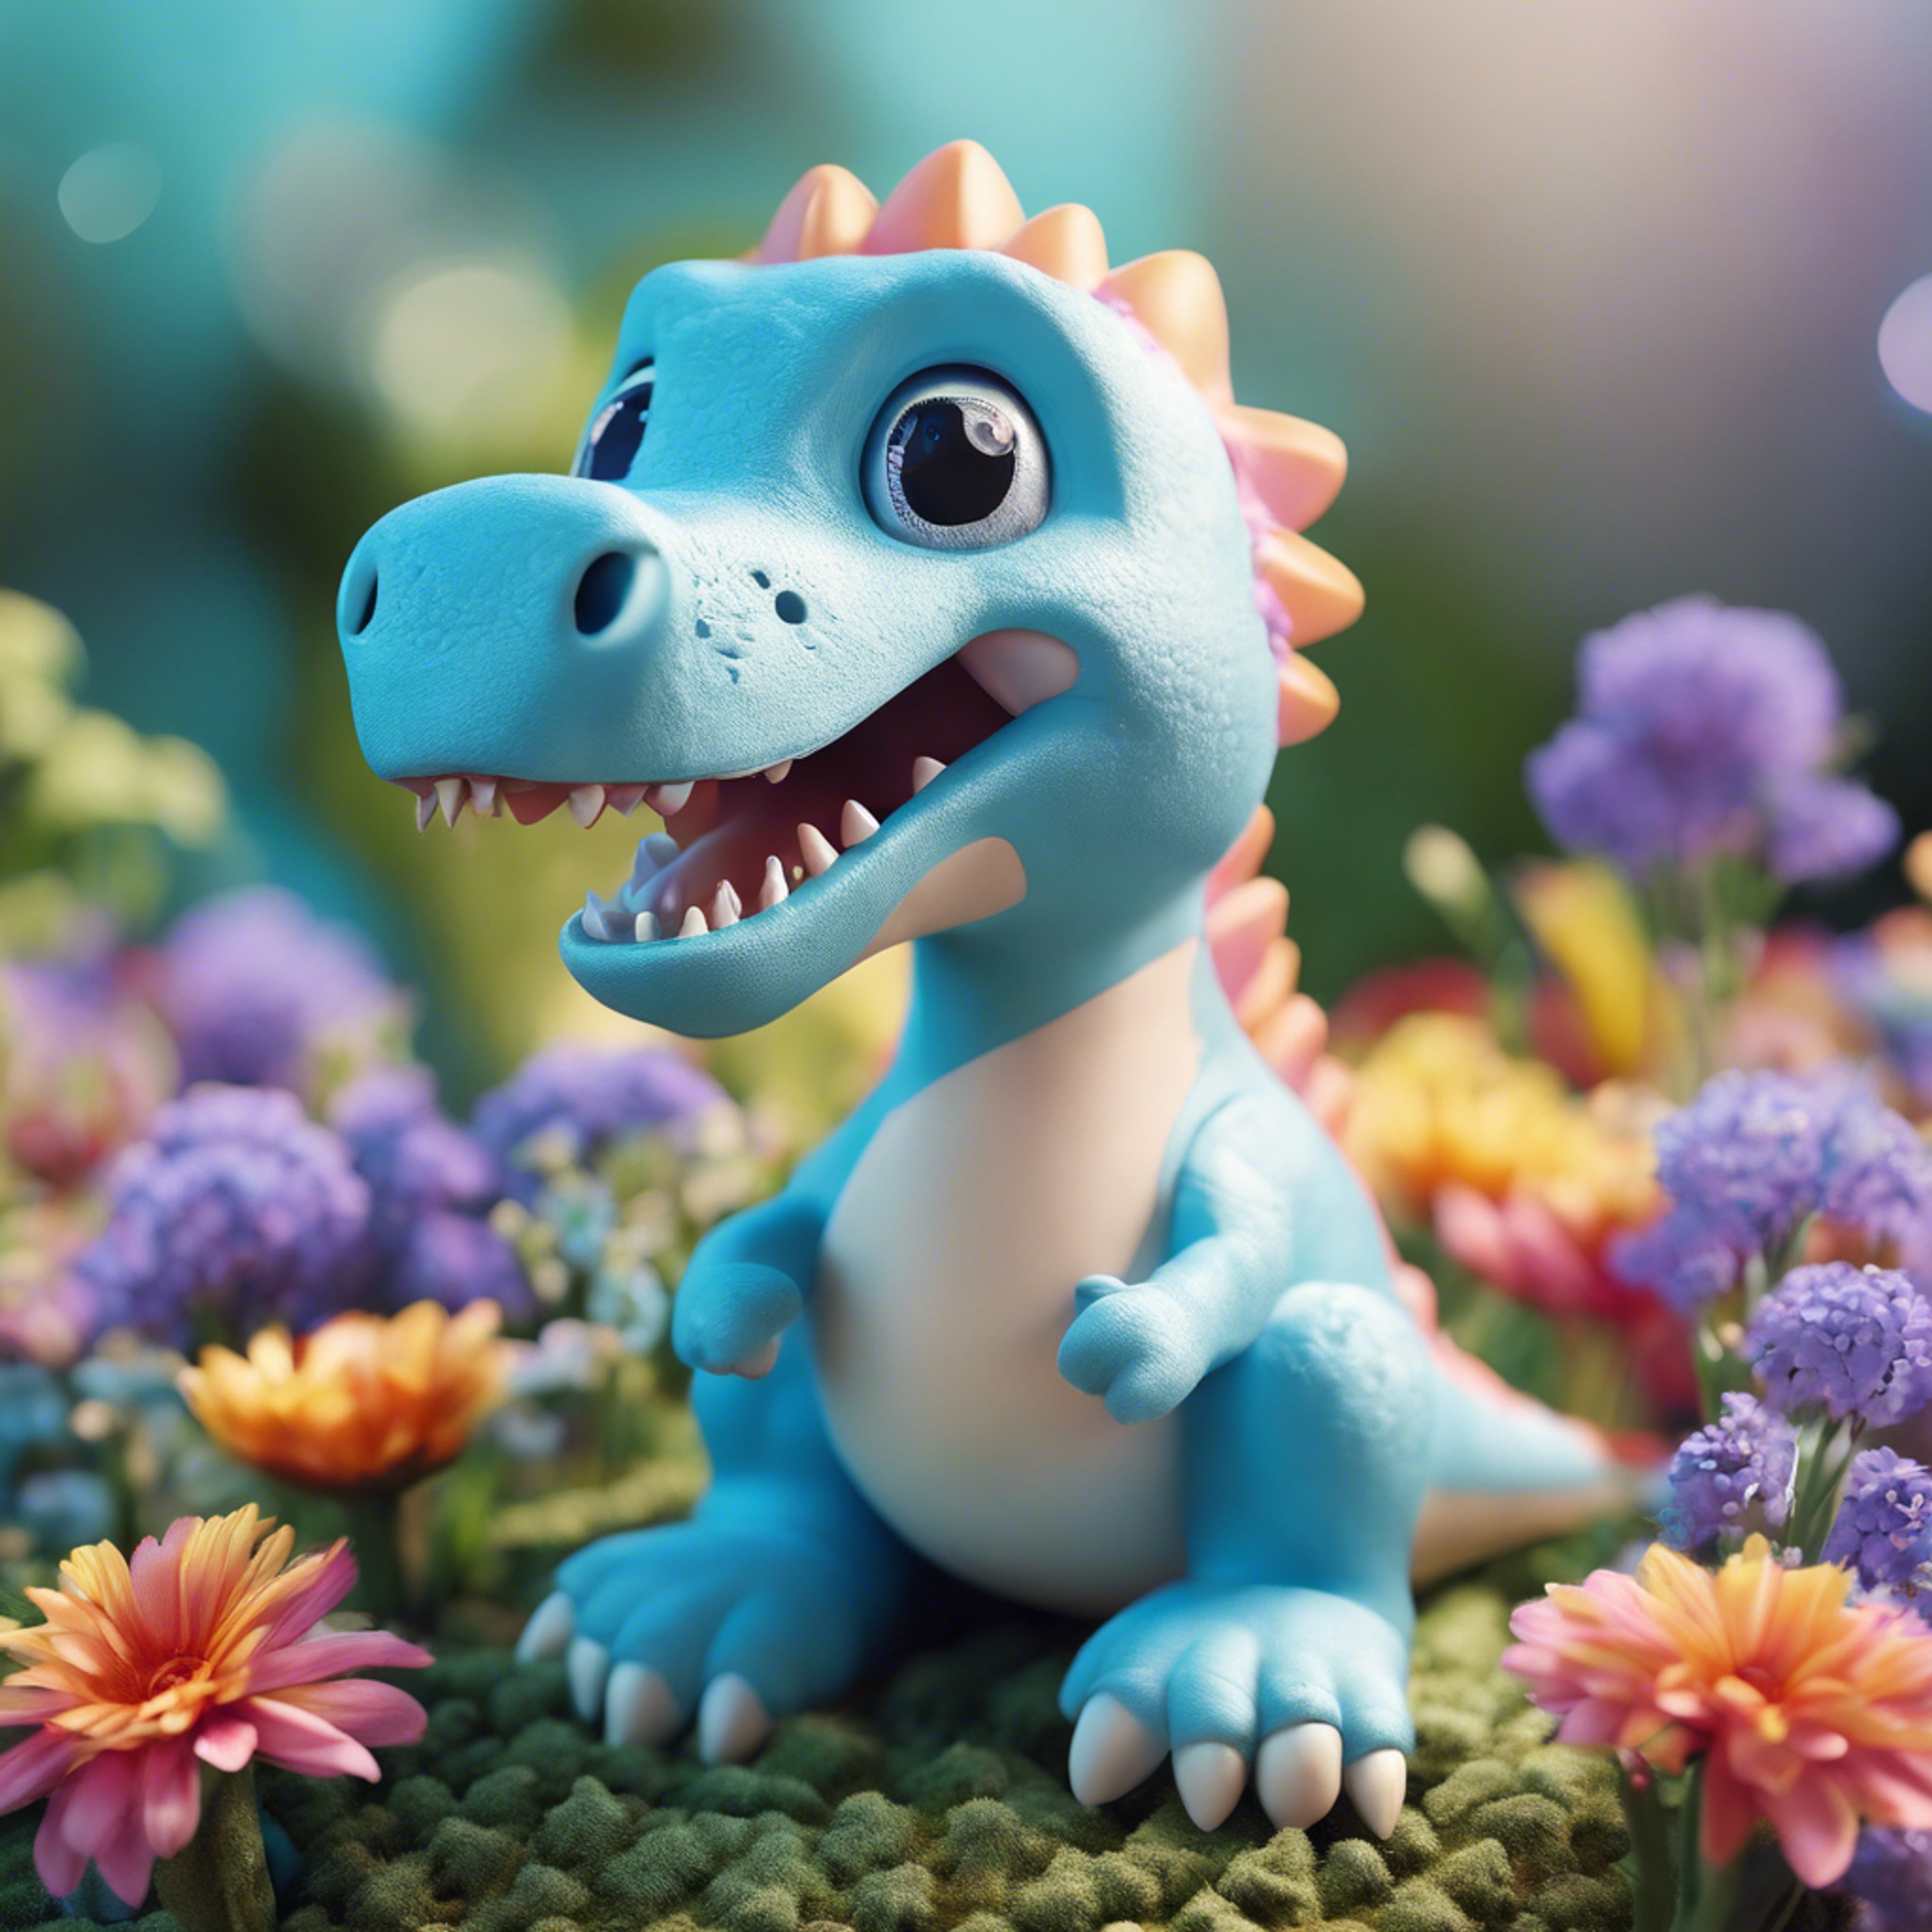 A cute light blue dinosaur with a kawaii expression, surrounded by brightly colored flowers. Hintergrund[445e6142c59b4fa2886e]